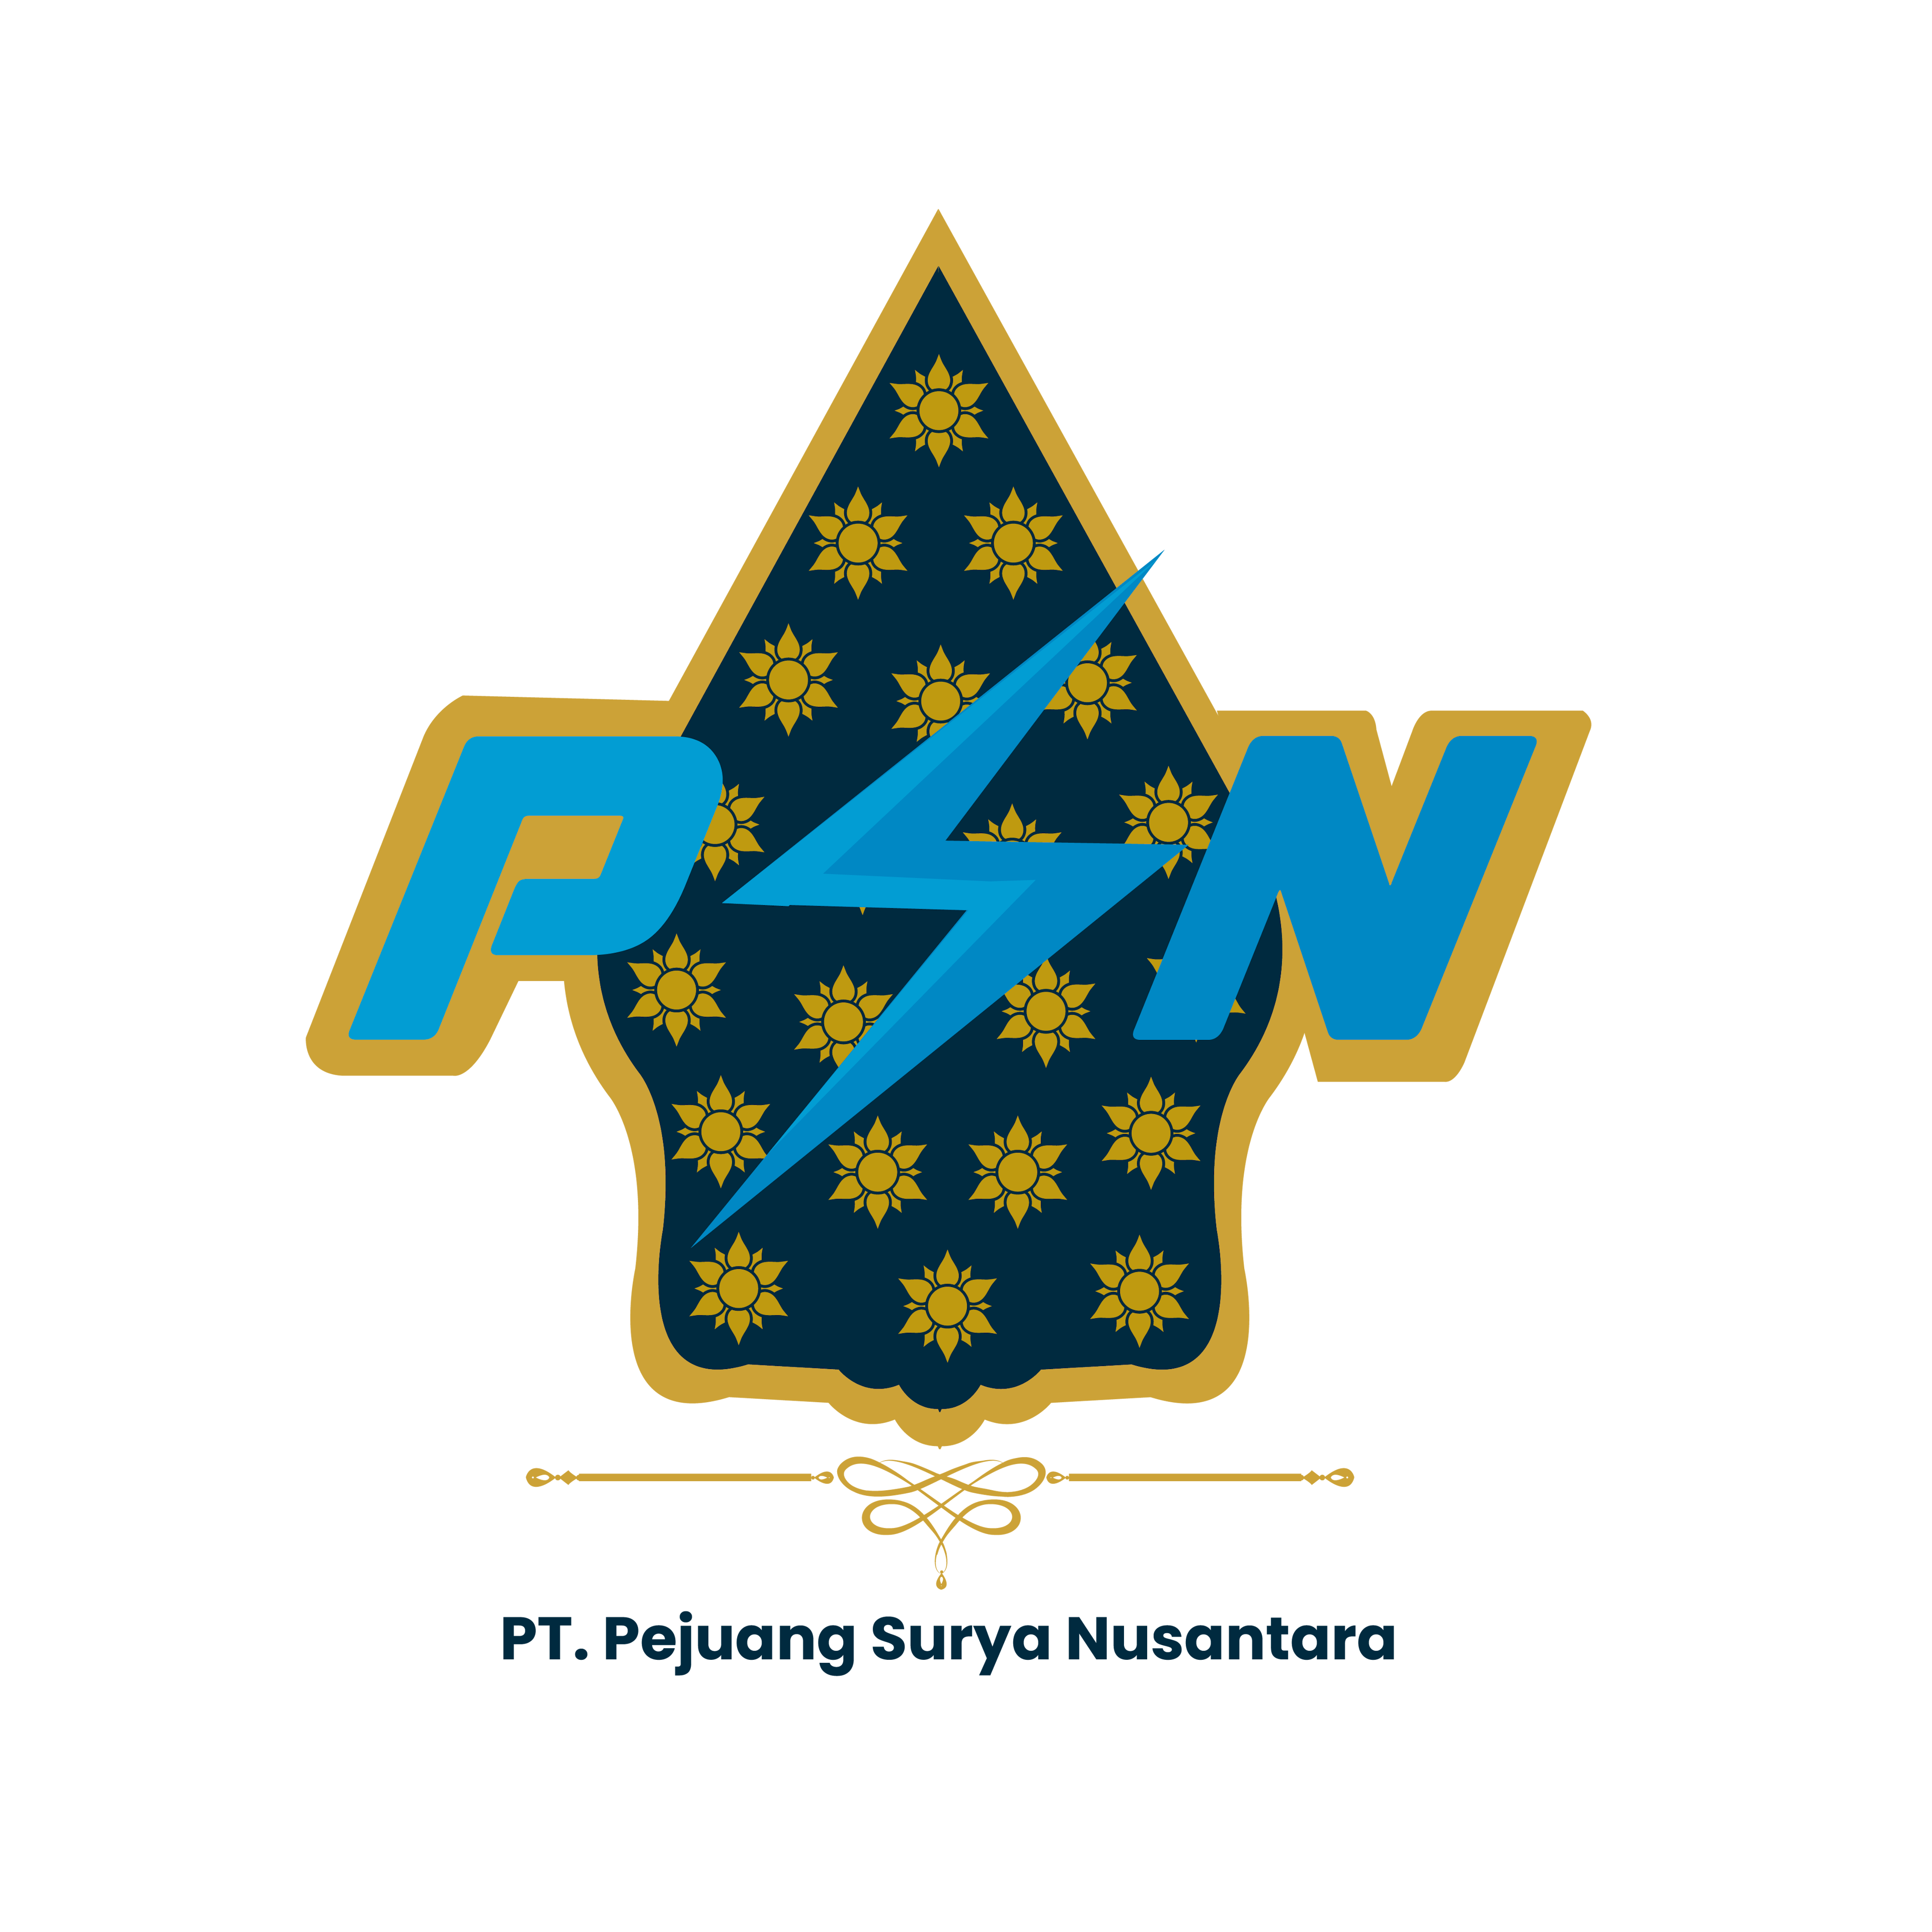 PT Pejuang Surya Nusantara was established on November 11, 2020. PSN engages in the provision of medium-scale solar PV rooftop solutions for manufacturing industries. <br><br>Project: <br>Rooftop solar leasing 1.365 kWp Cilegon, Banten - Indonesia
